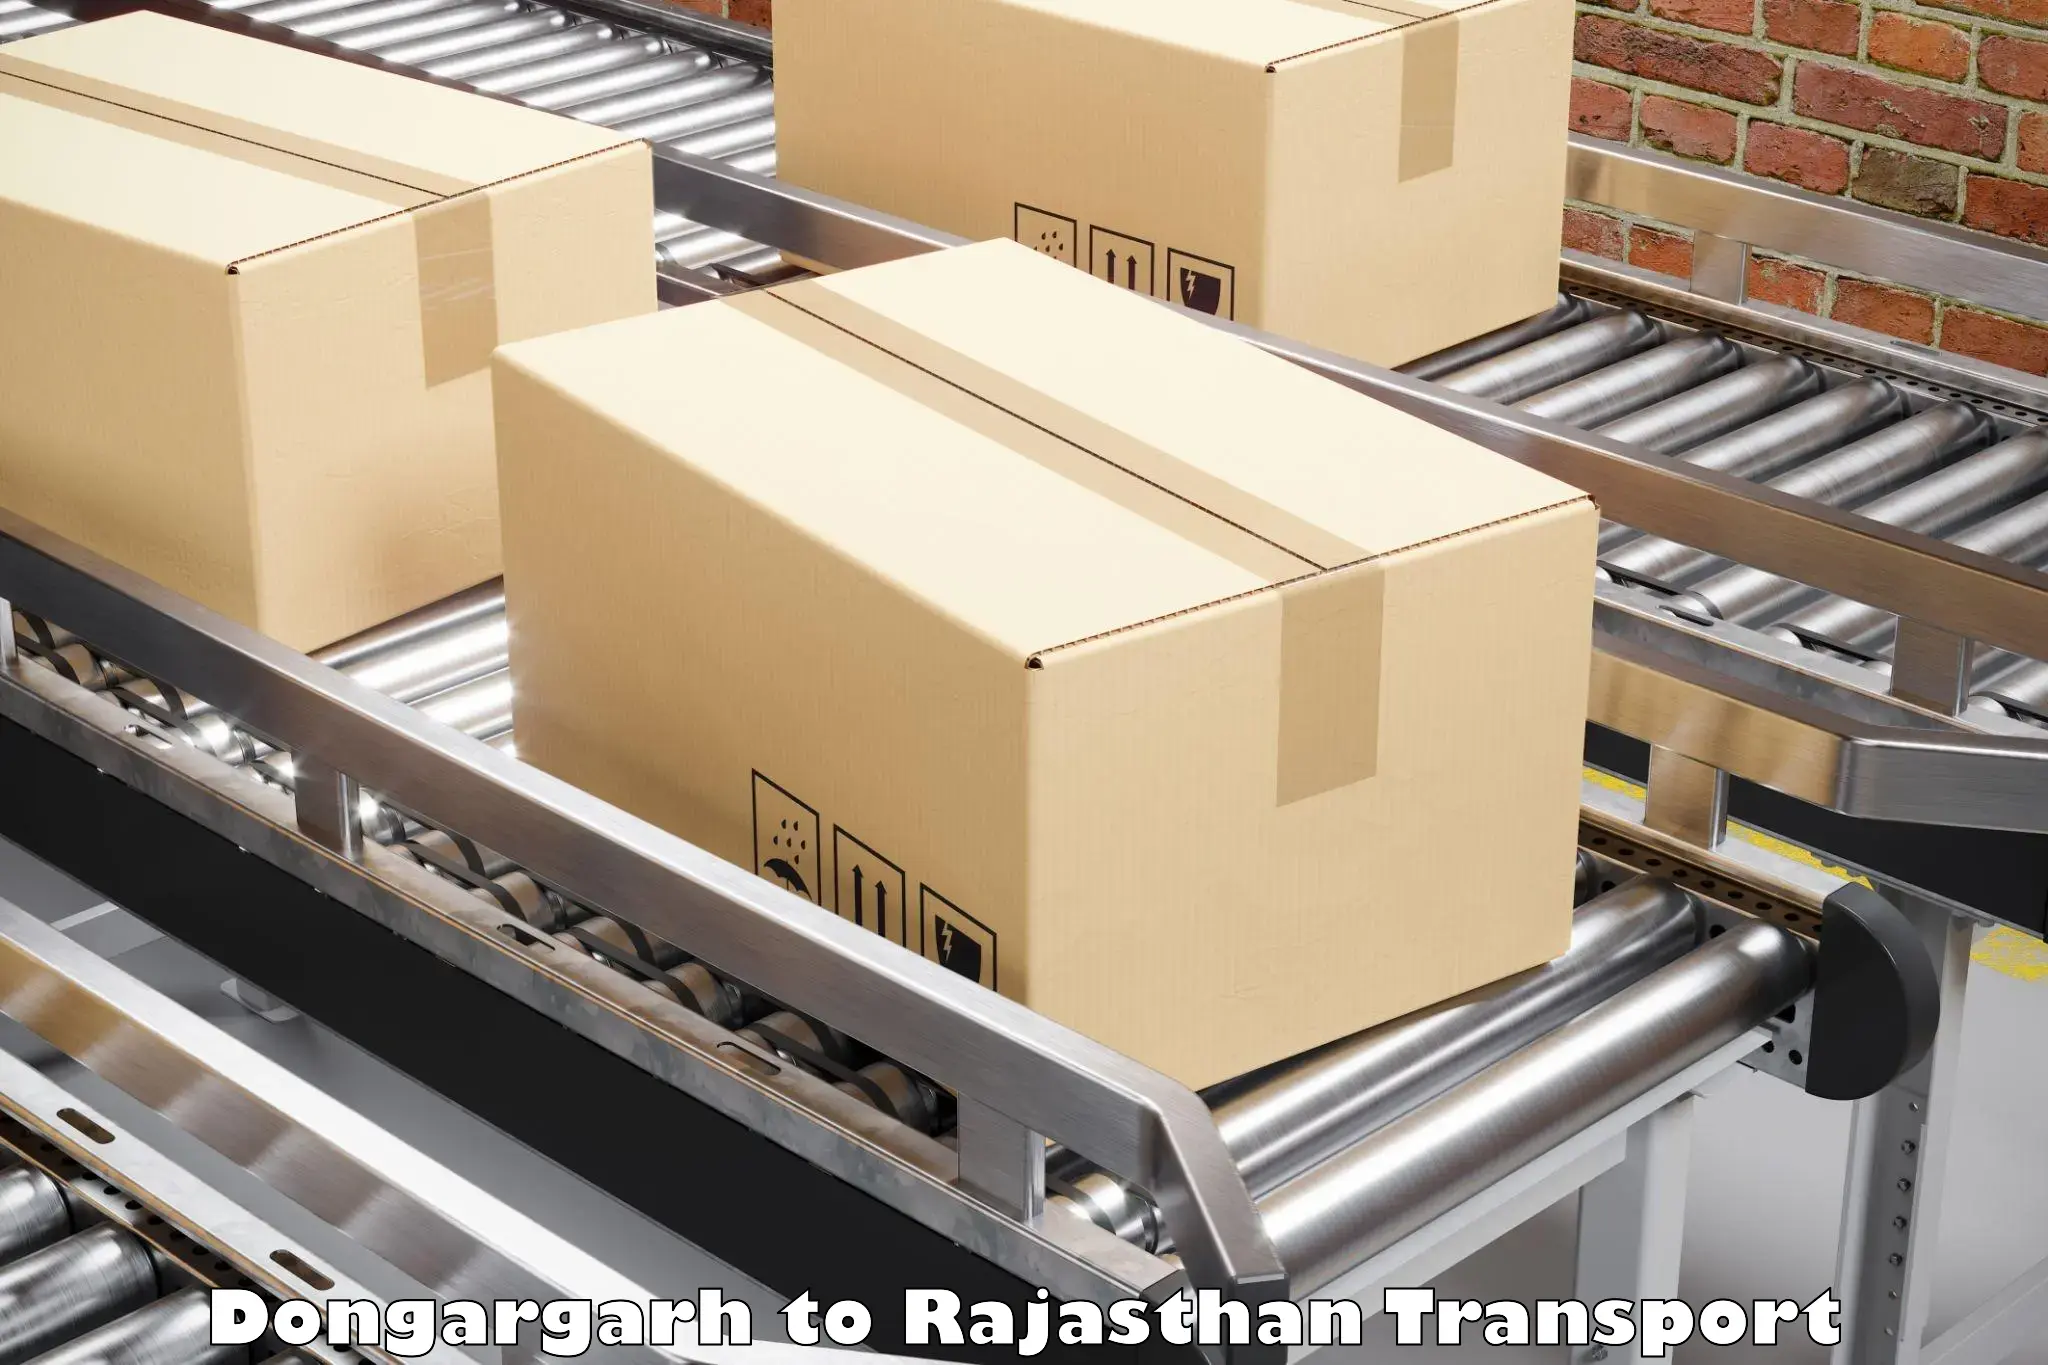 Goods delivery service Dongargarh to Ajeetgarh